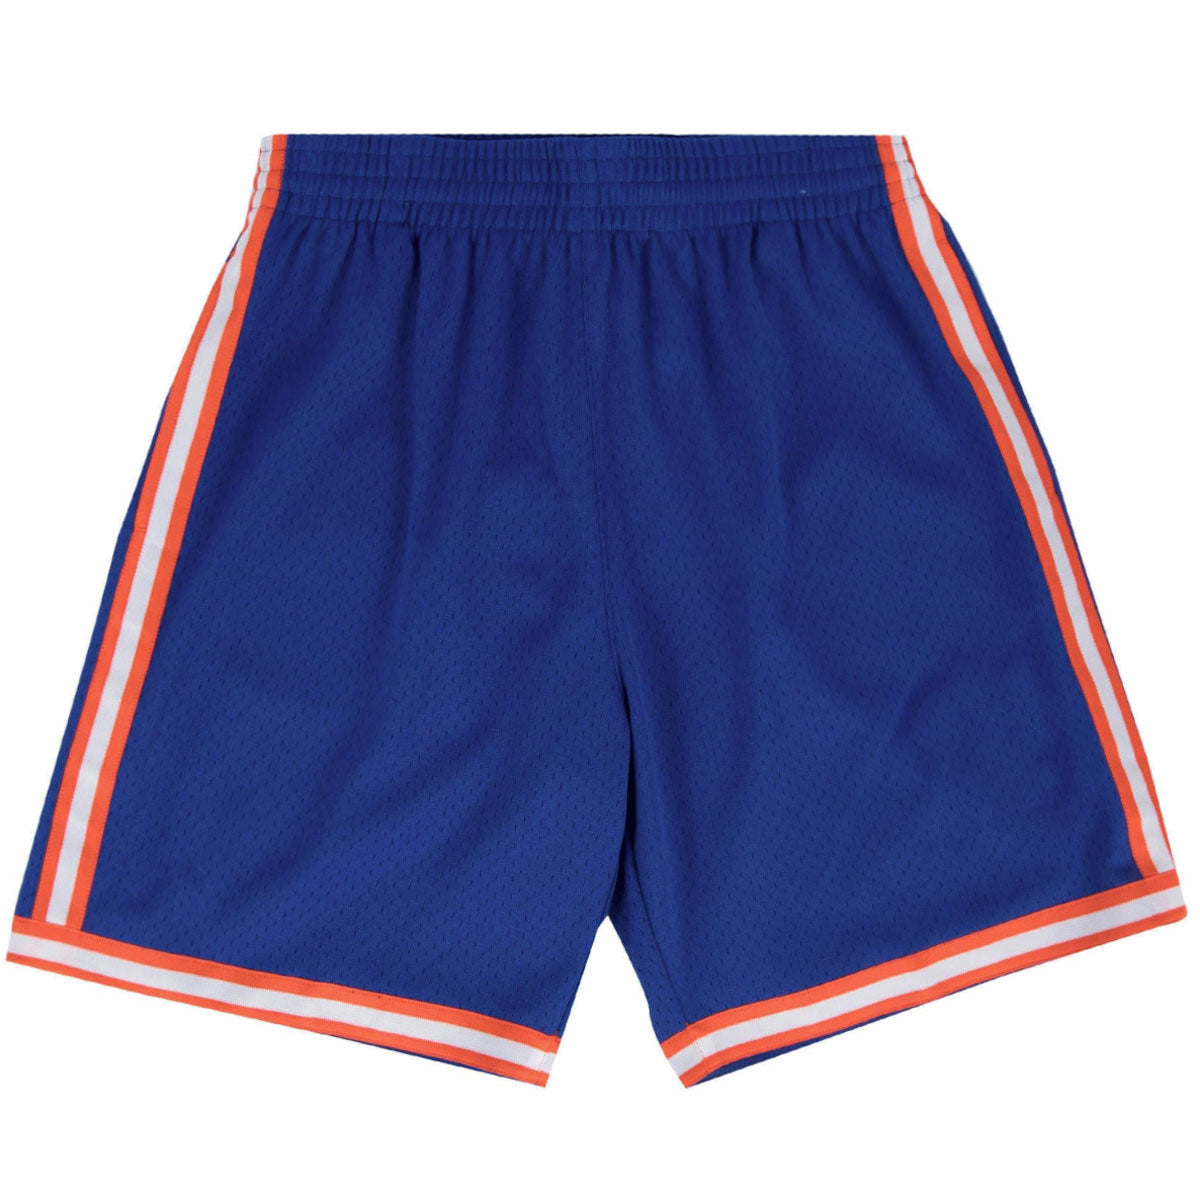 Mitchell & Ness All In One Knicks Shorts - Patrick Ewing image 2